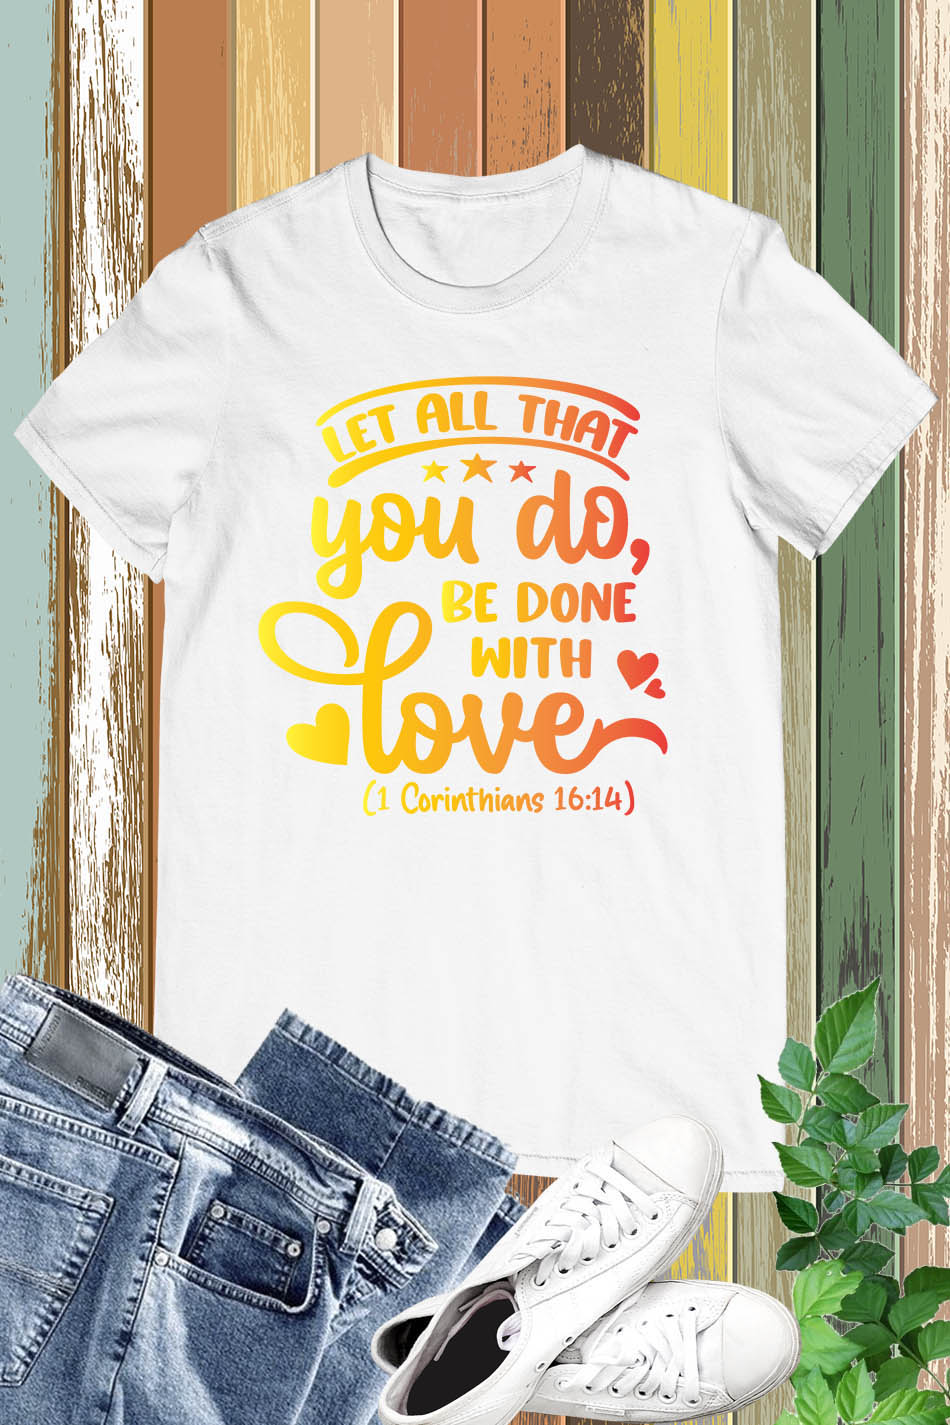 Let all That You Do, Be Done With Love Bible verse Shirts